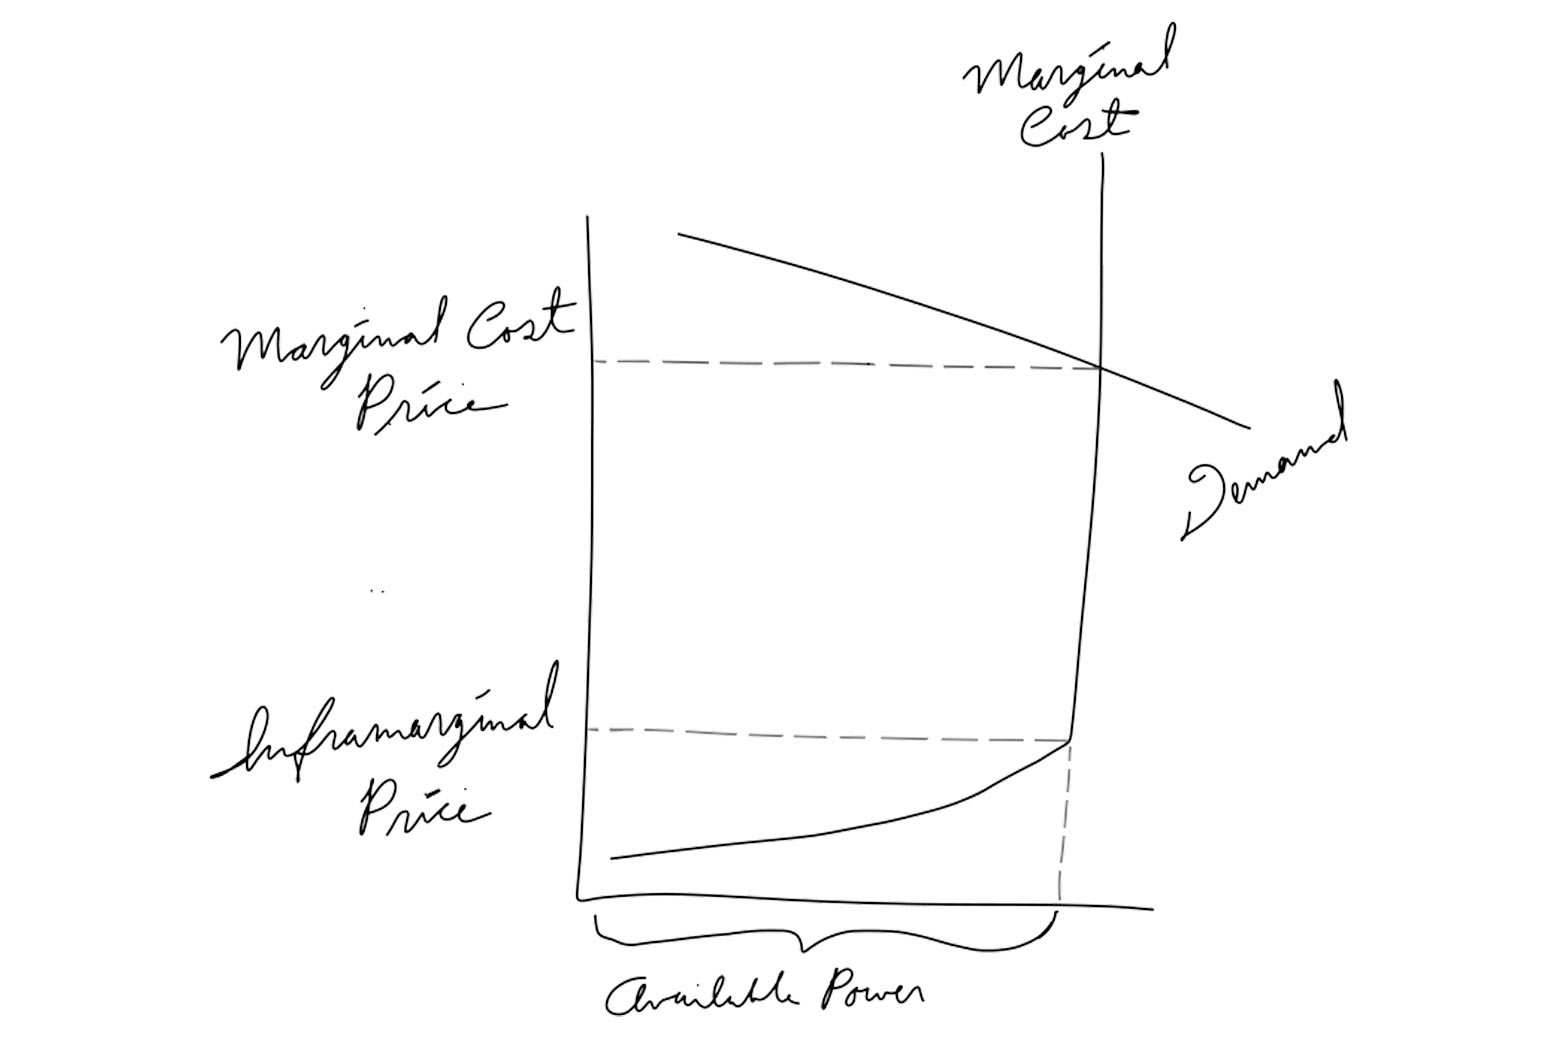 A hand-drawn chart showing how the marginal cost skyrockets in a shortage, and showing where it would hit the marginal-cost price vs. the inframarginal price.